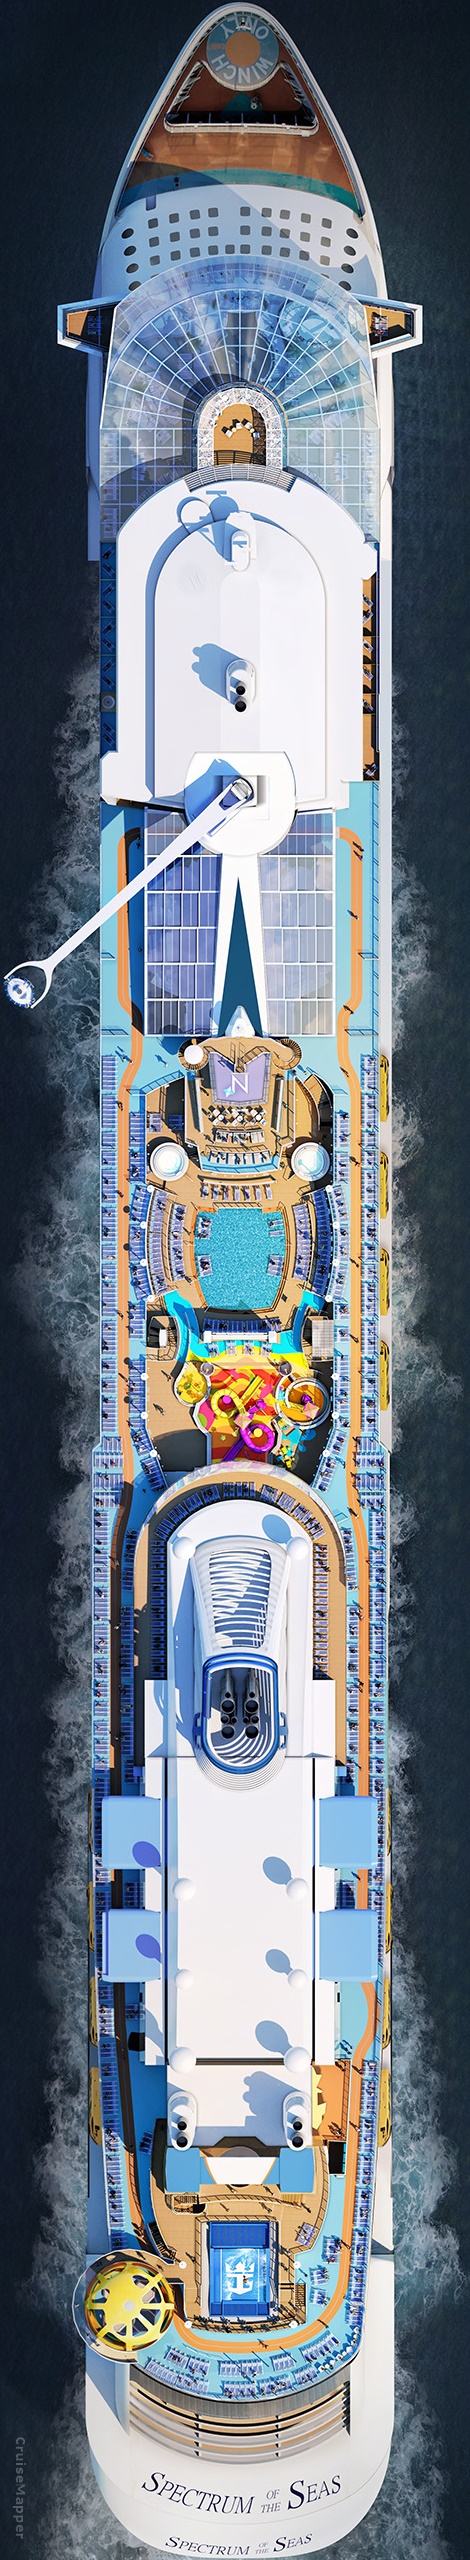 Spectrum Of The Seas Itinerary Schedule Current Position